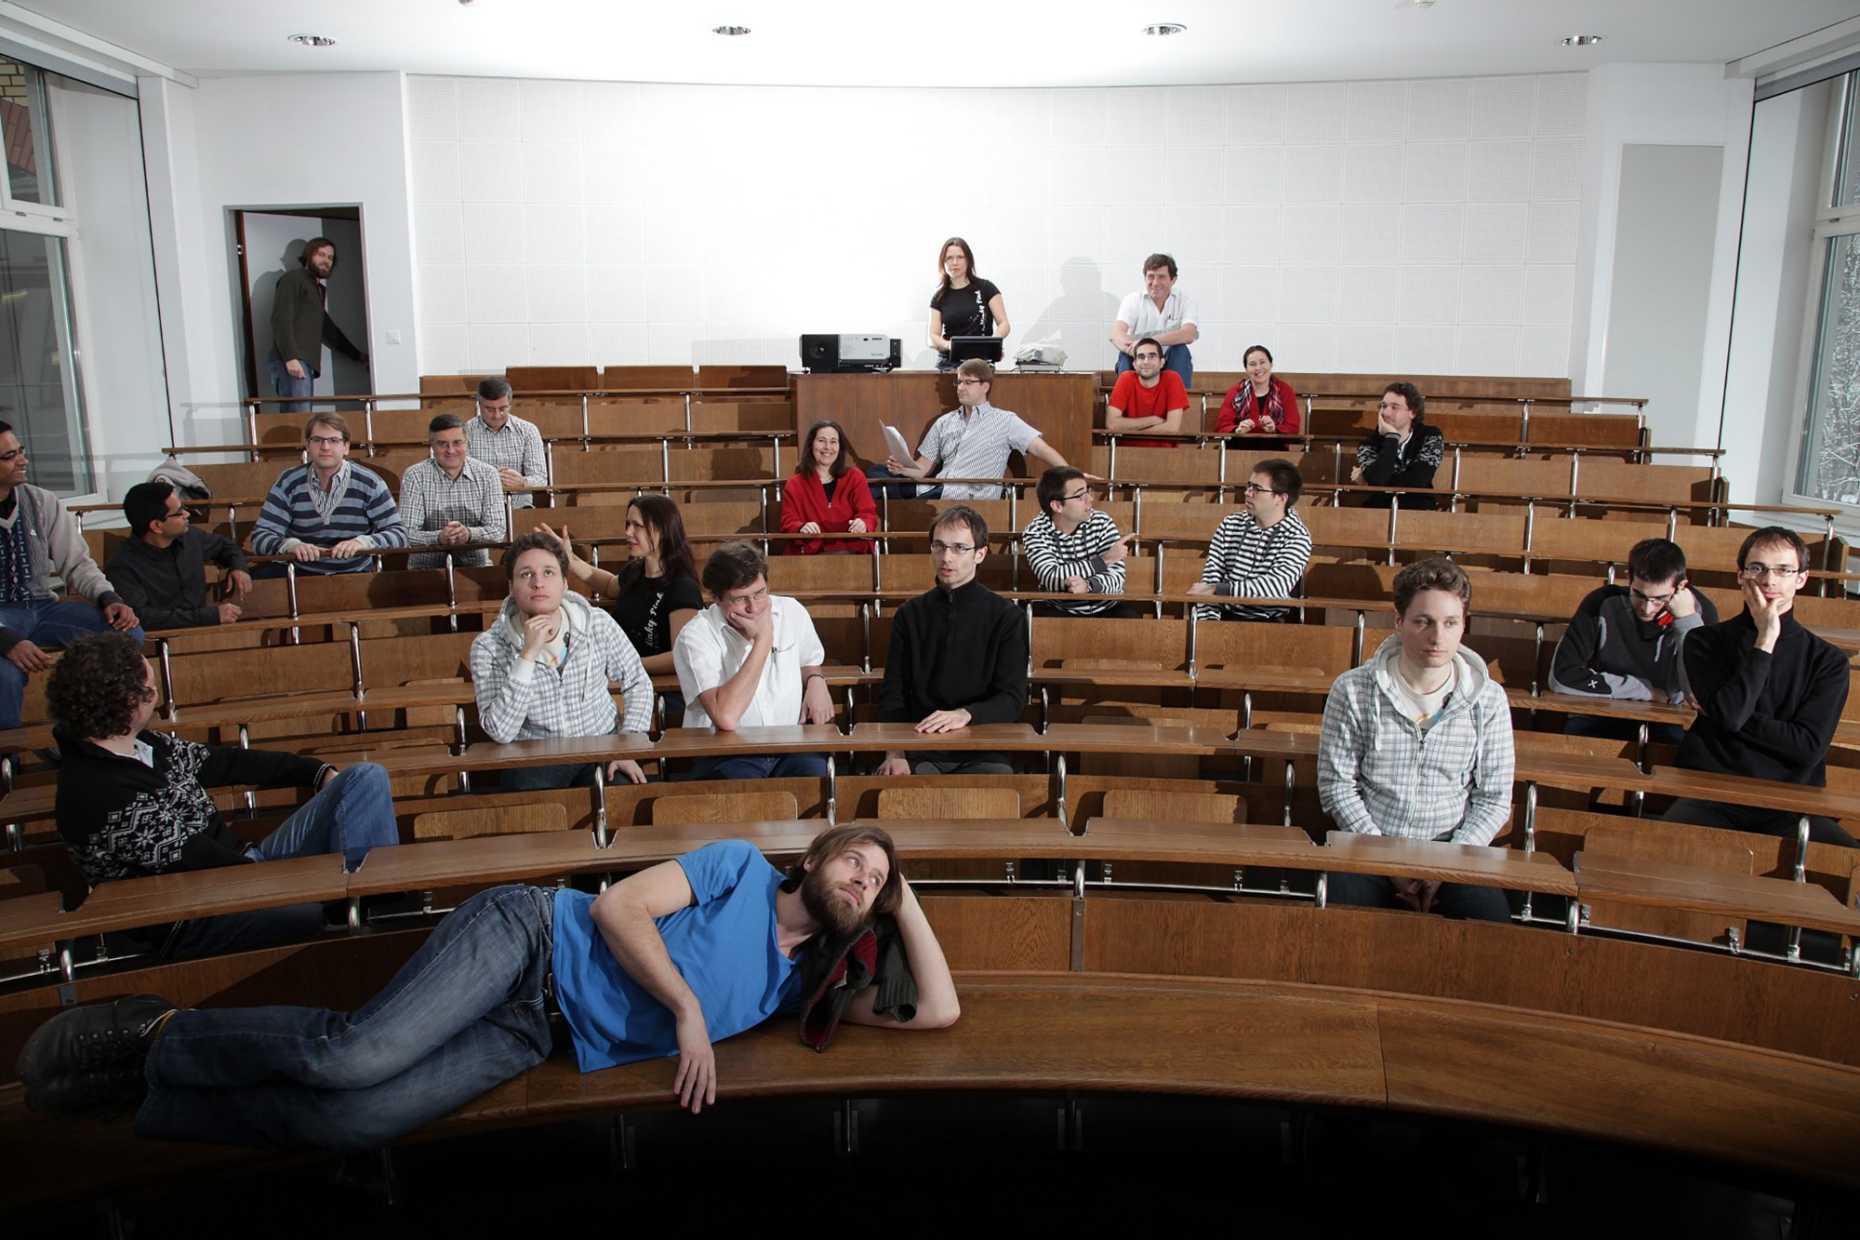 Group of Prof. Widmayer with Marianna Berger in lecture hall